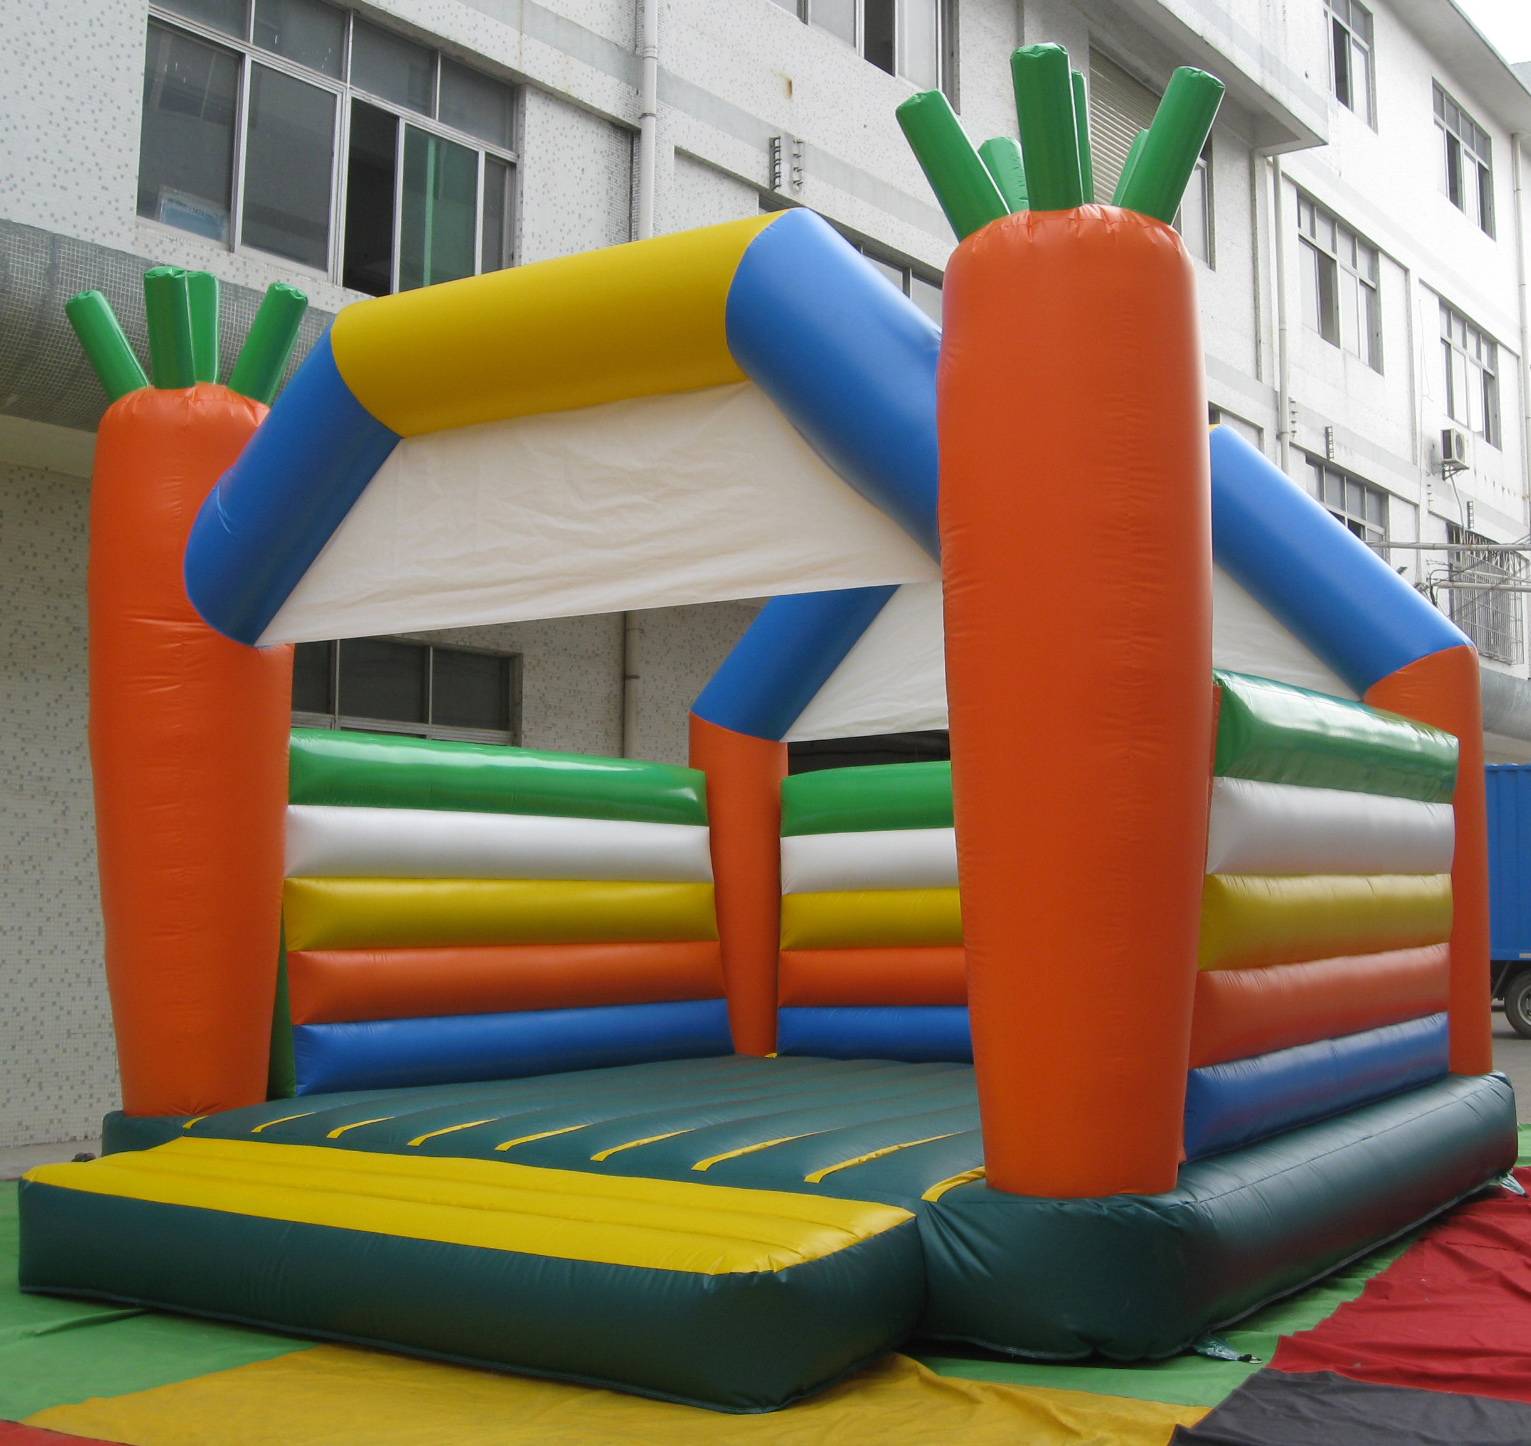 High-quality inflatable Bounce House Castle